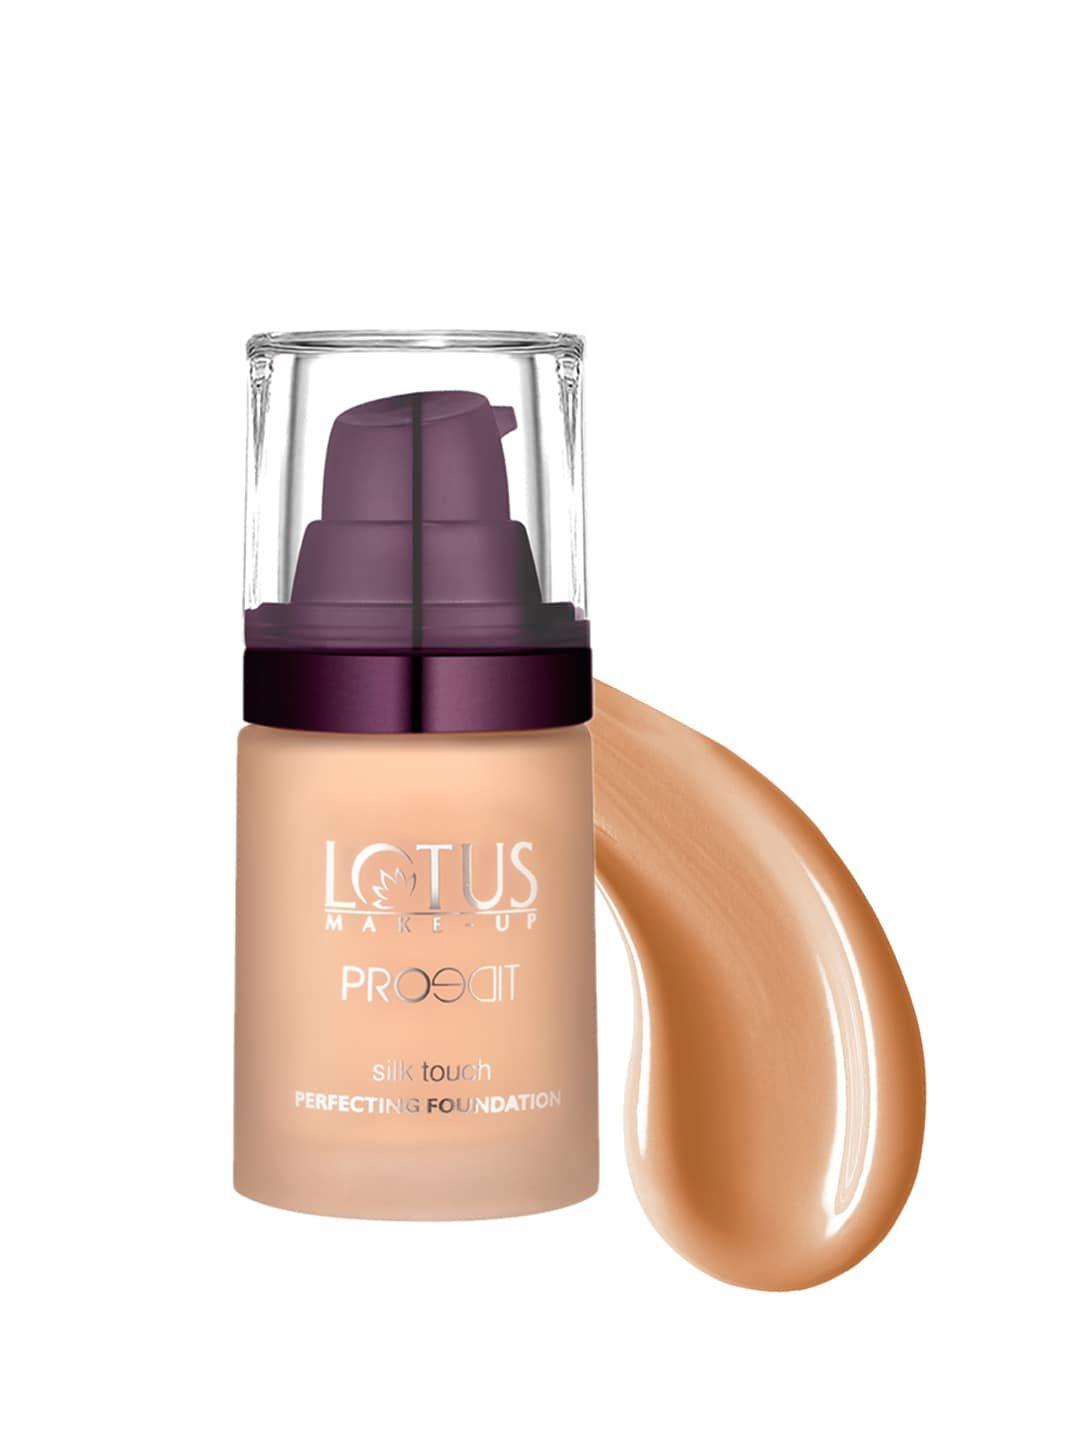 lotus herbals sustainable make-up proedit silk touch perfecting foundation - almond sf04 30ml